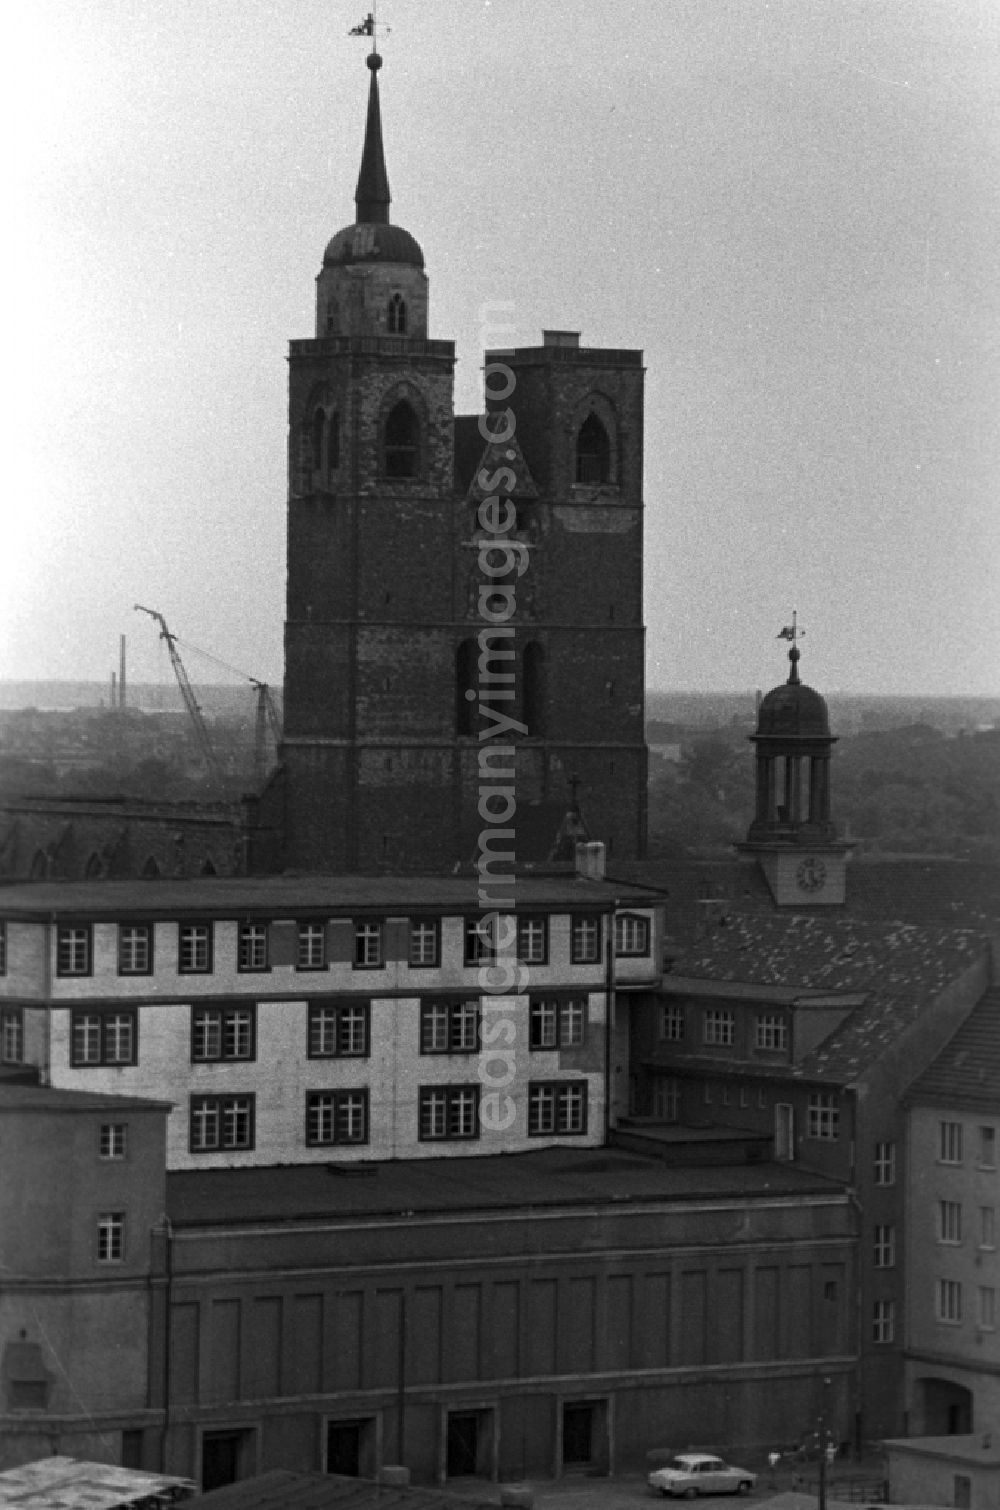 GDR image archive: Magdeburg - View of the city of Magdeburg with St. John's Church in Magdeburg in Saxony - Anhalt